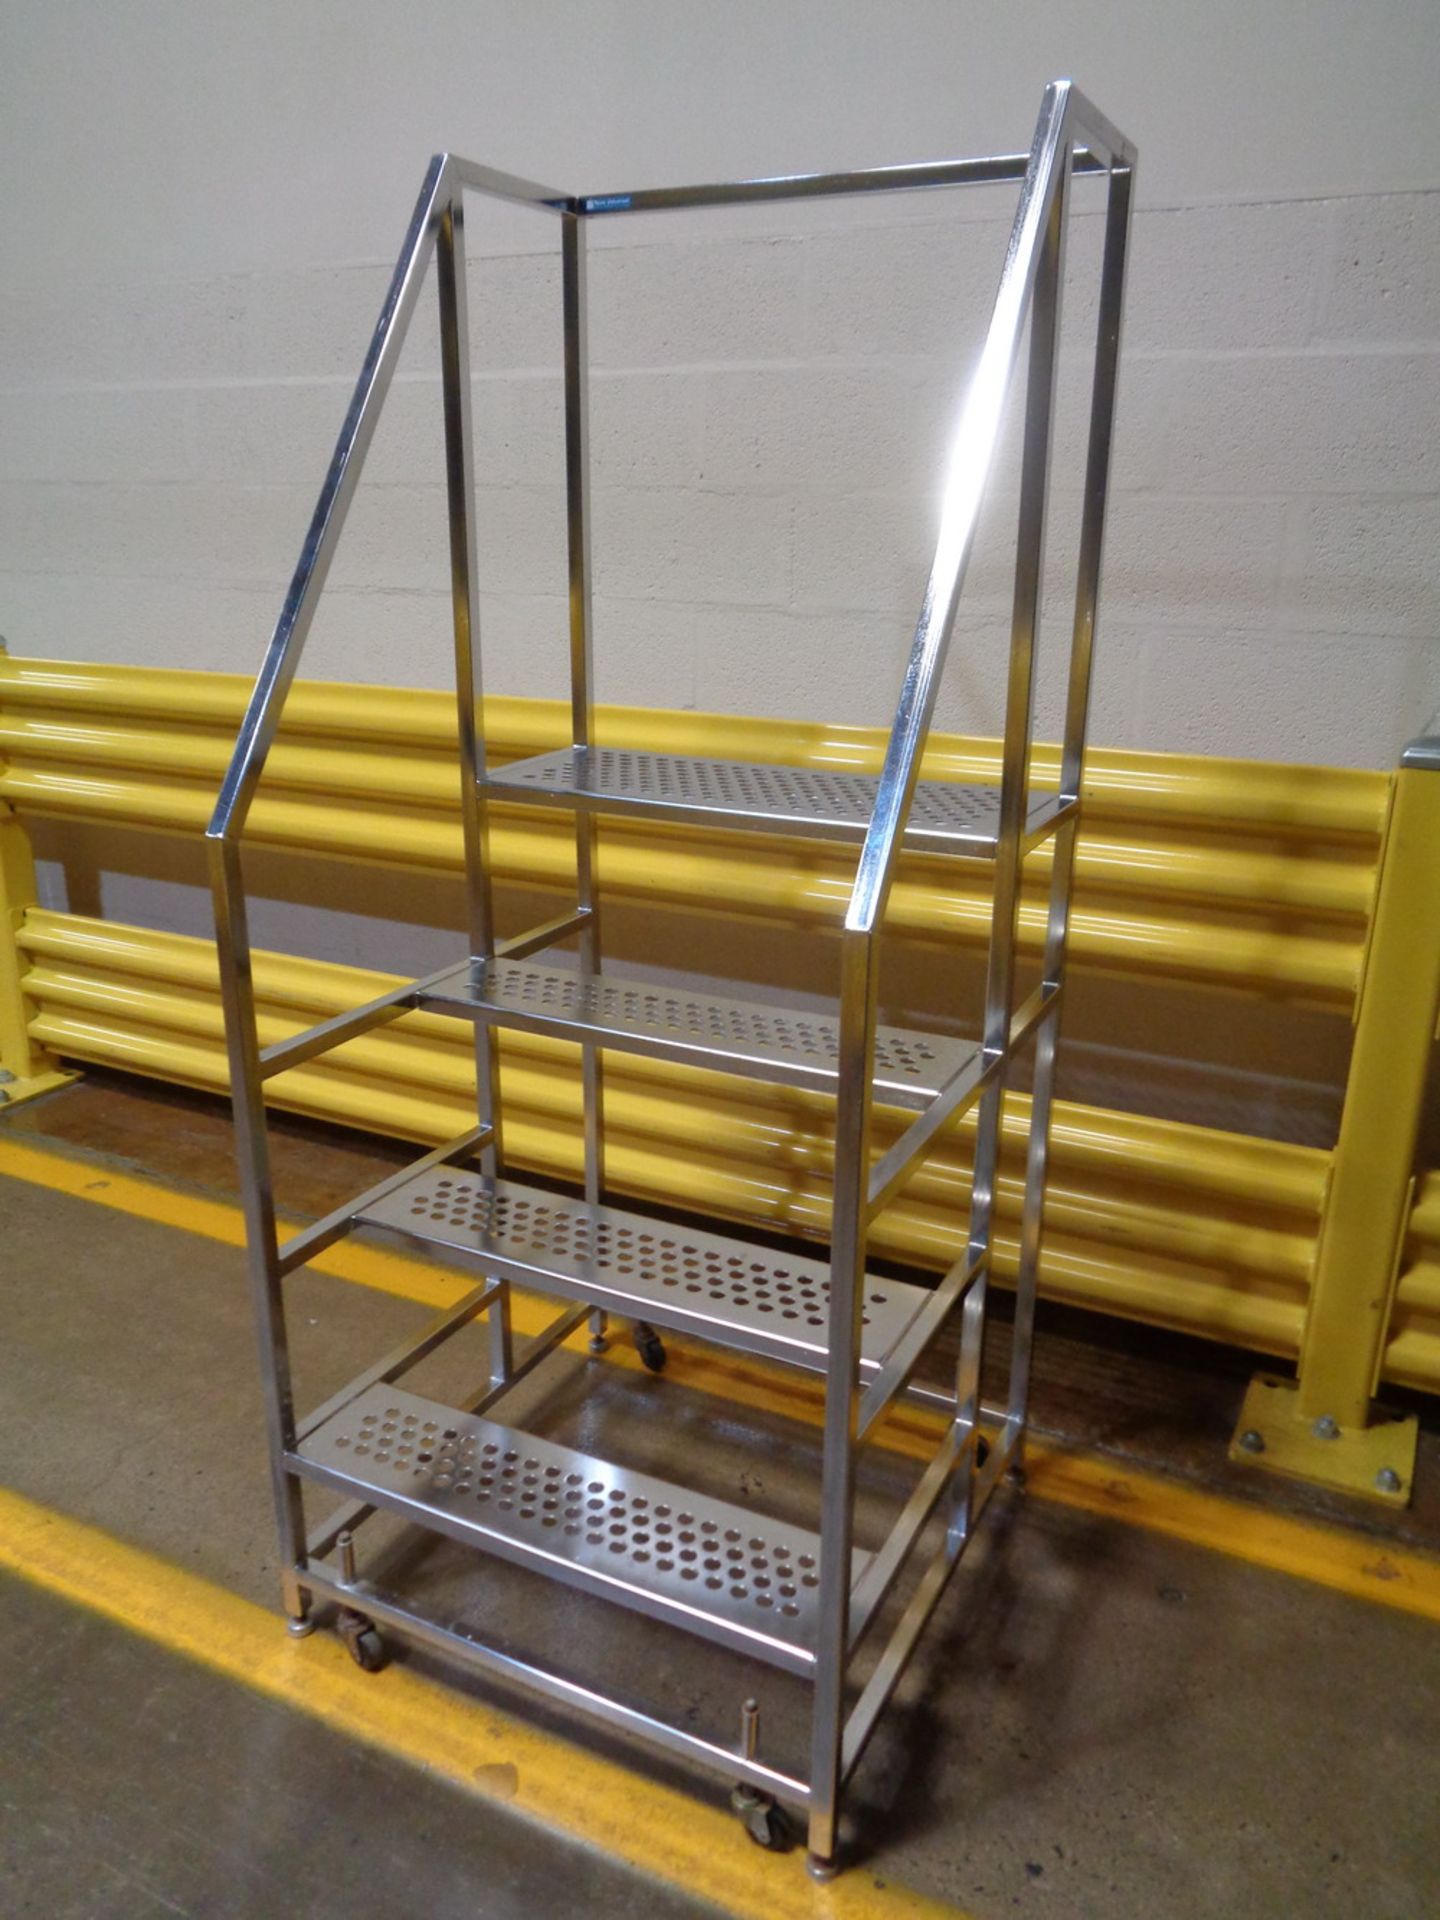 Stainless Steel 4 Step Portable Staircase - Image 2 of 2